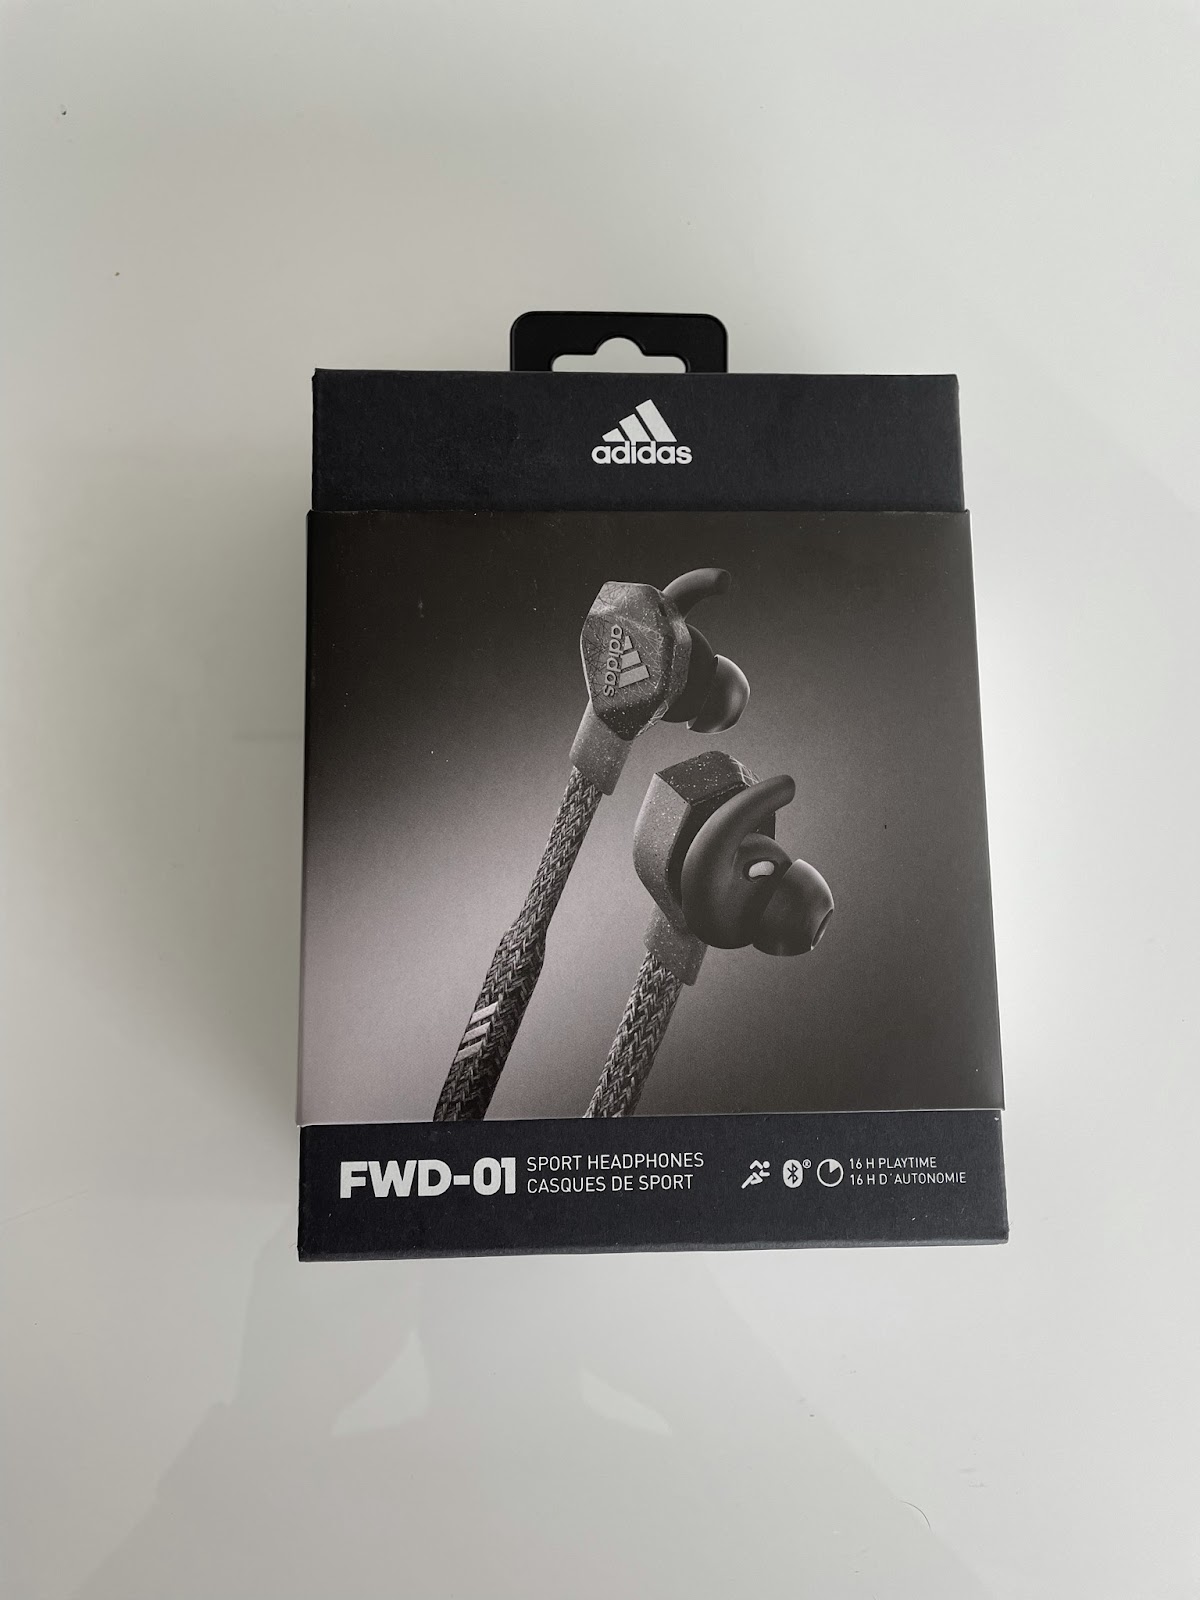 Road Trail Run: Avis Impressions: Ecouteurs Bluetooth adidas FWD-01 Sport (French)